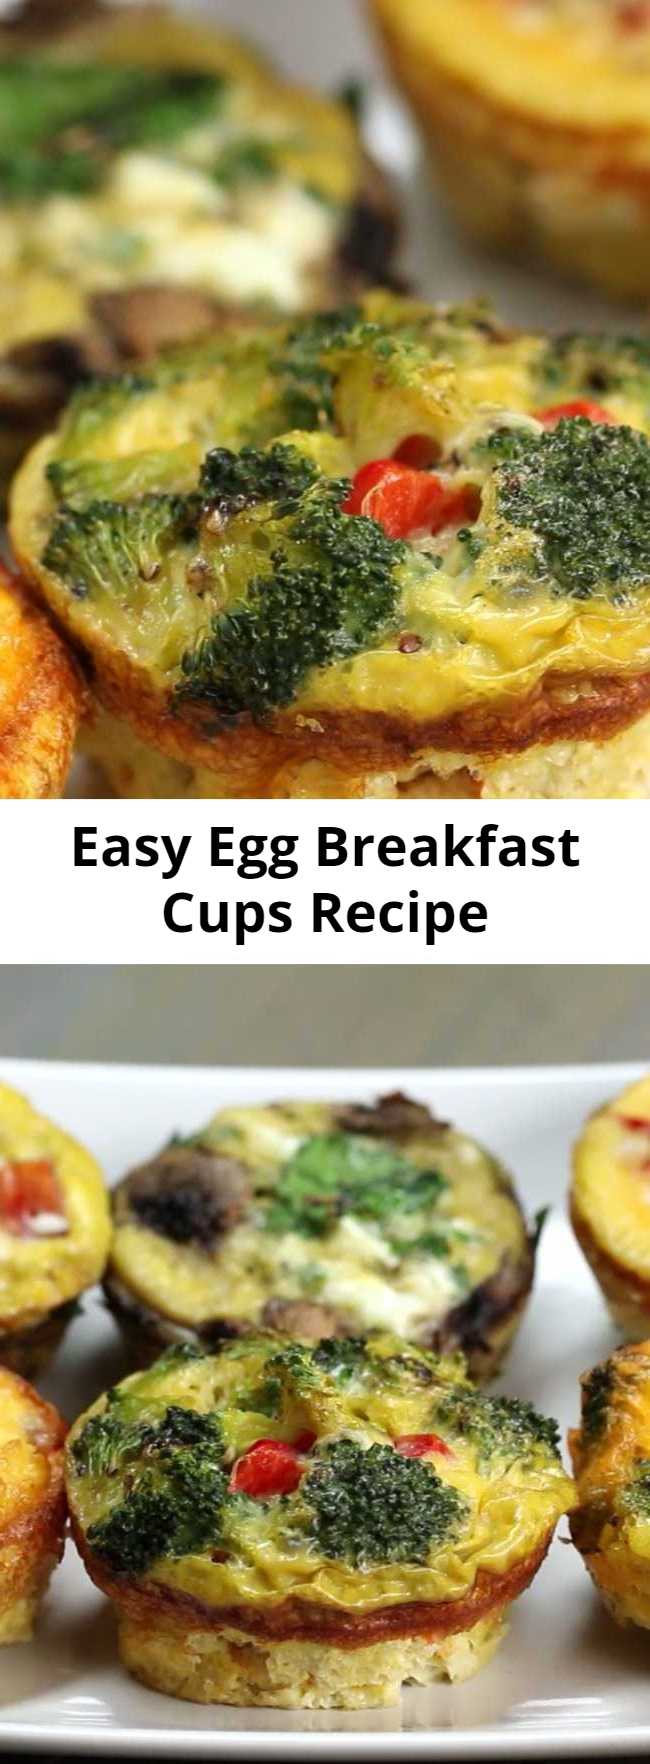 Easy Egg Breakfast Cups Recipe - Egg Breakfast Cups are low carb, filling and quick to grab while running out of the door! Can be cooked ahead of time and refrigerated for when you need them to grab and go!